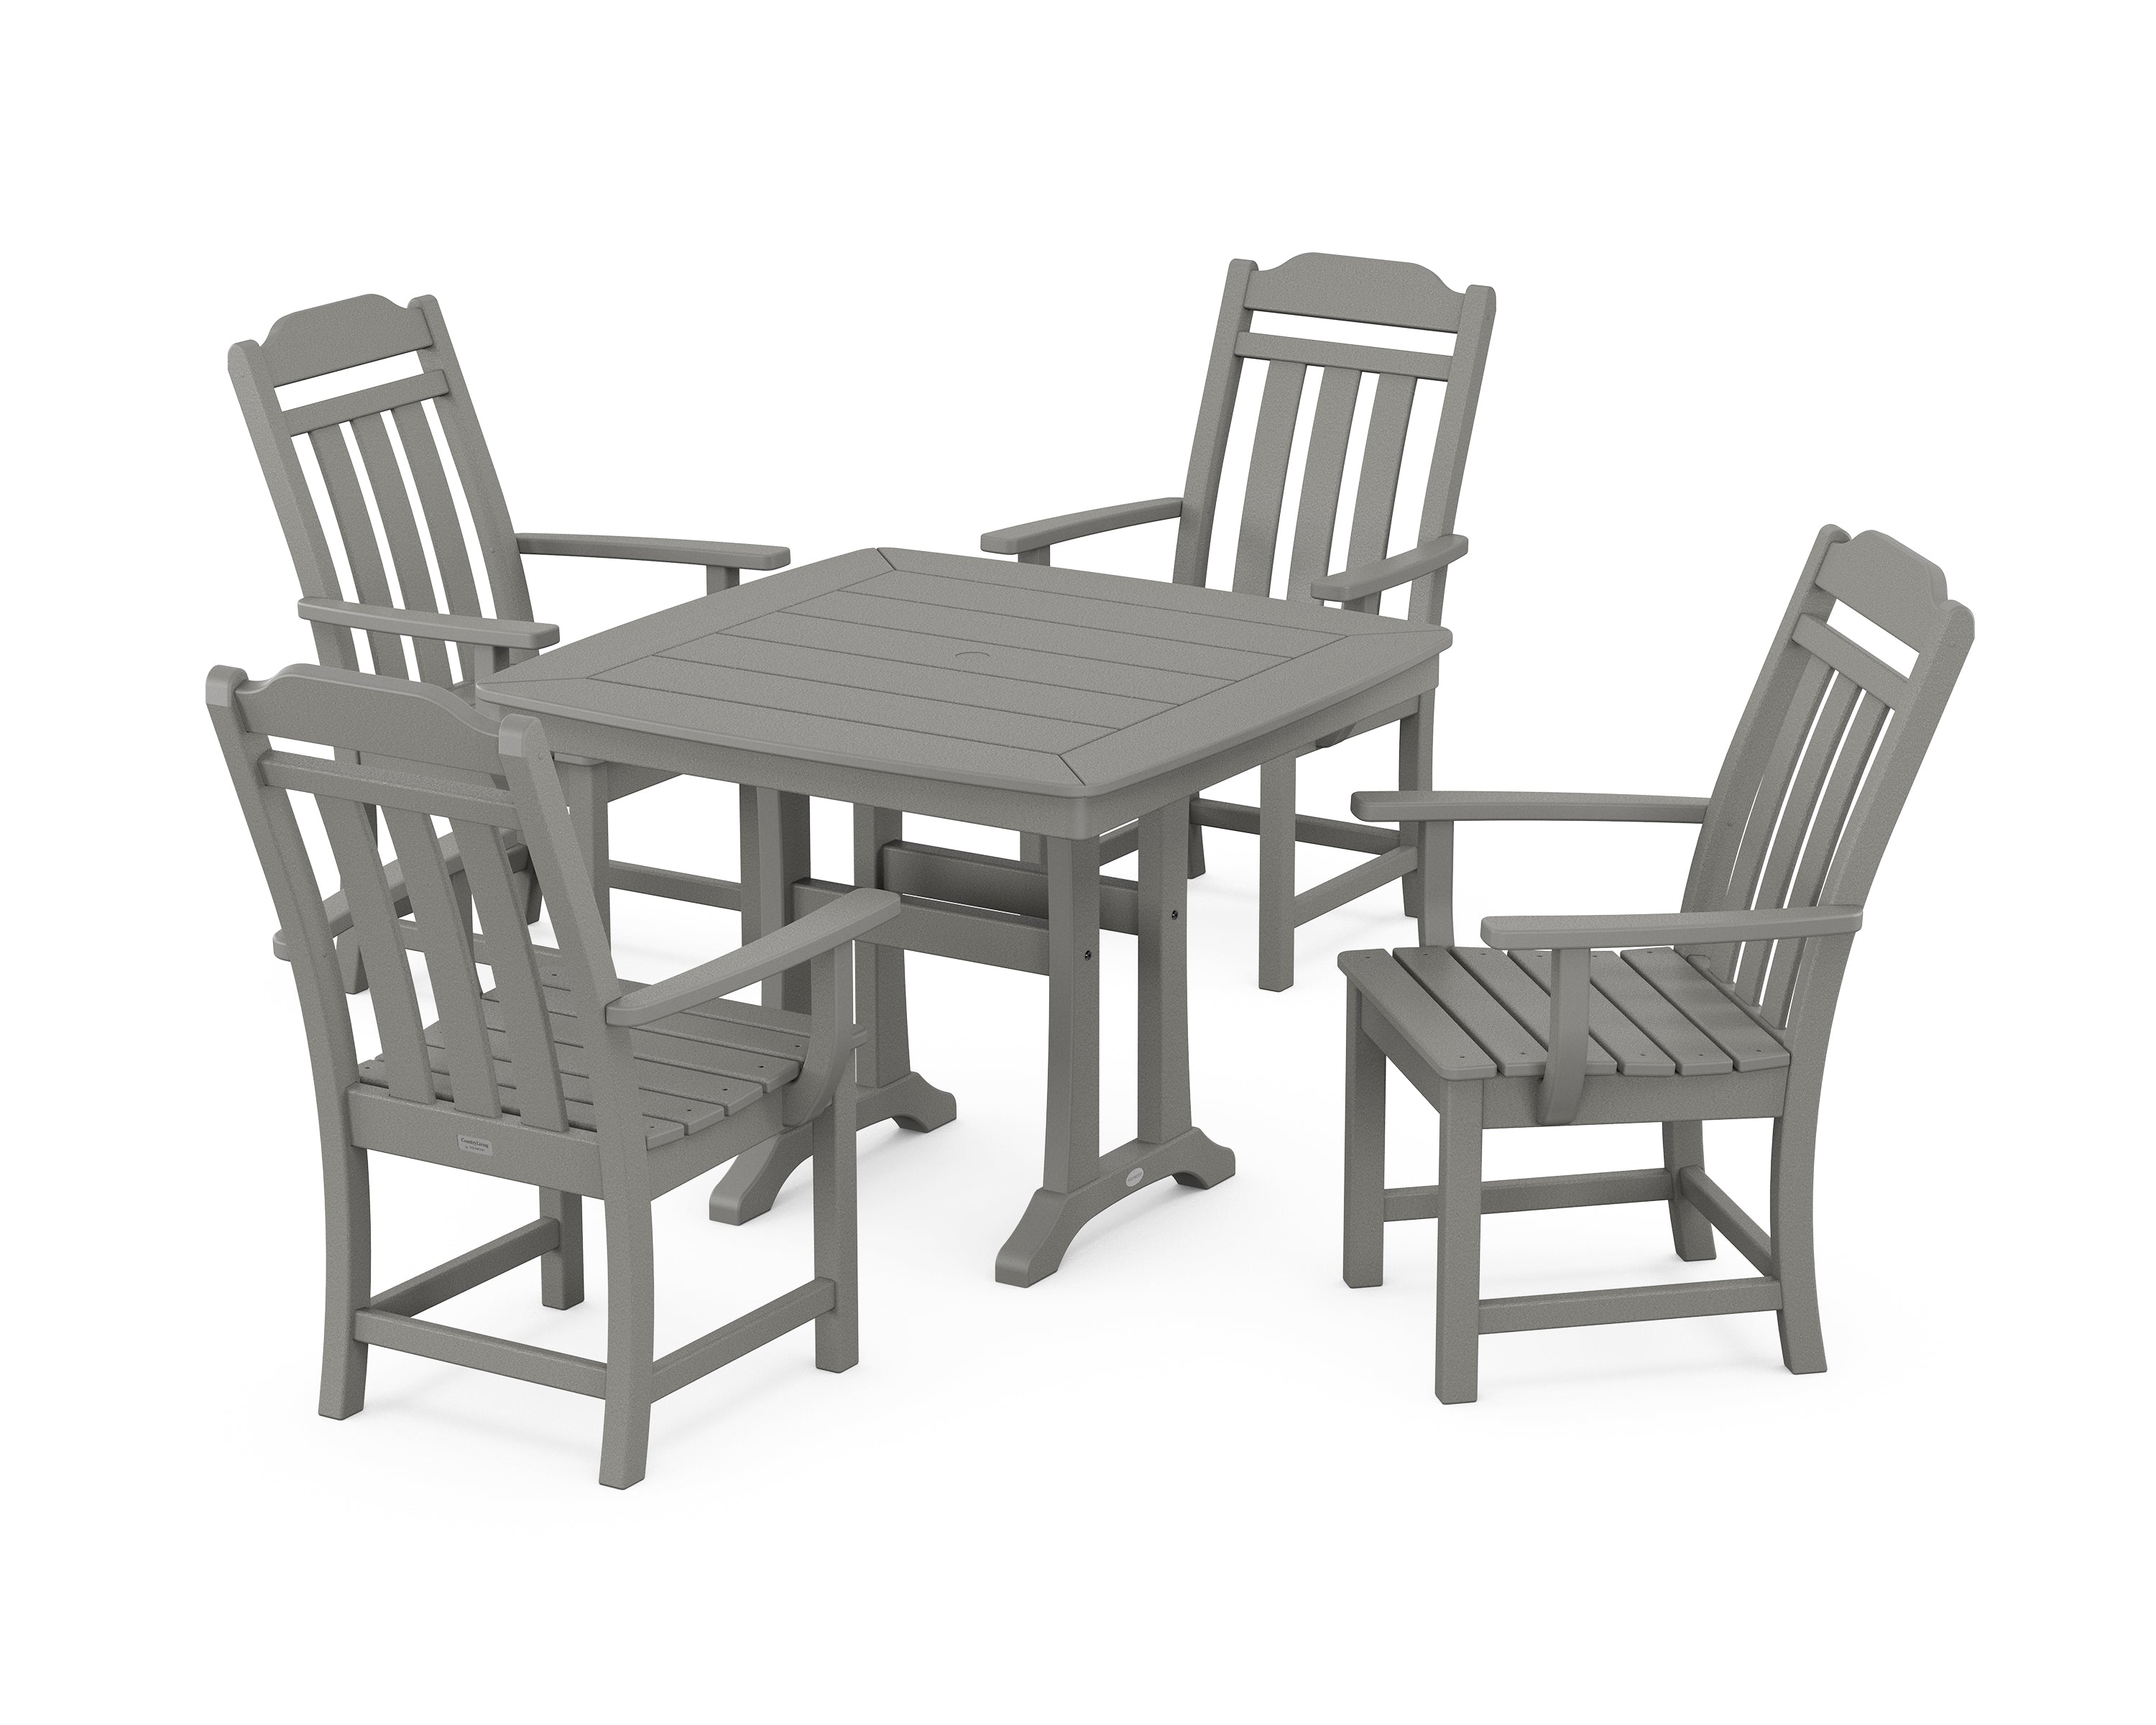 Polywood Country Living 5-Piece Dining Set with Trestle Legs in Slate Grey